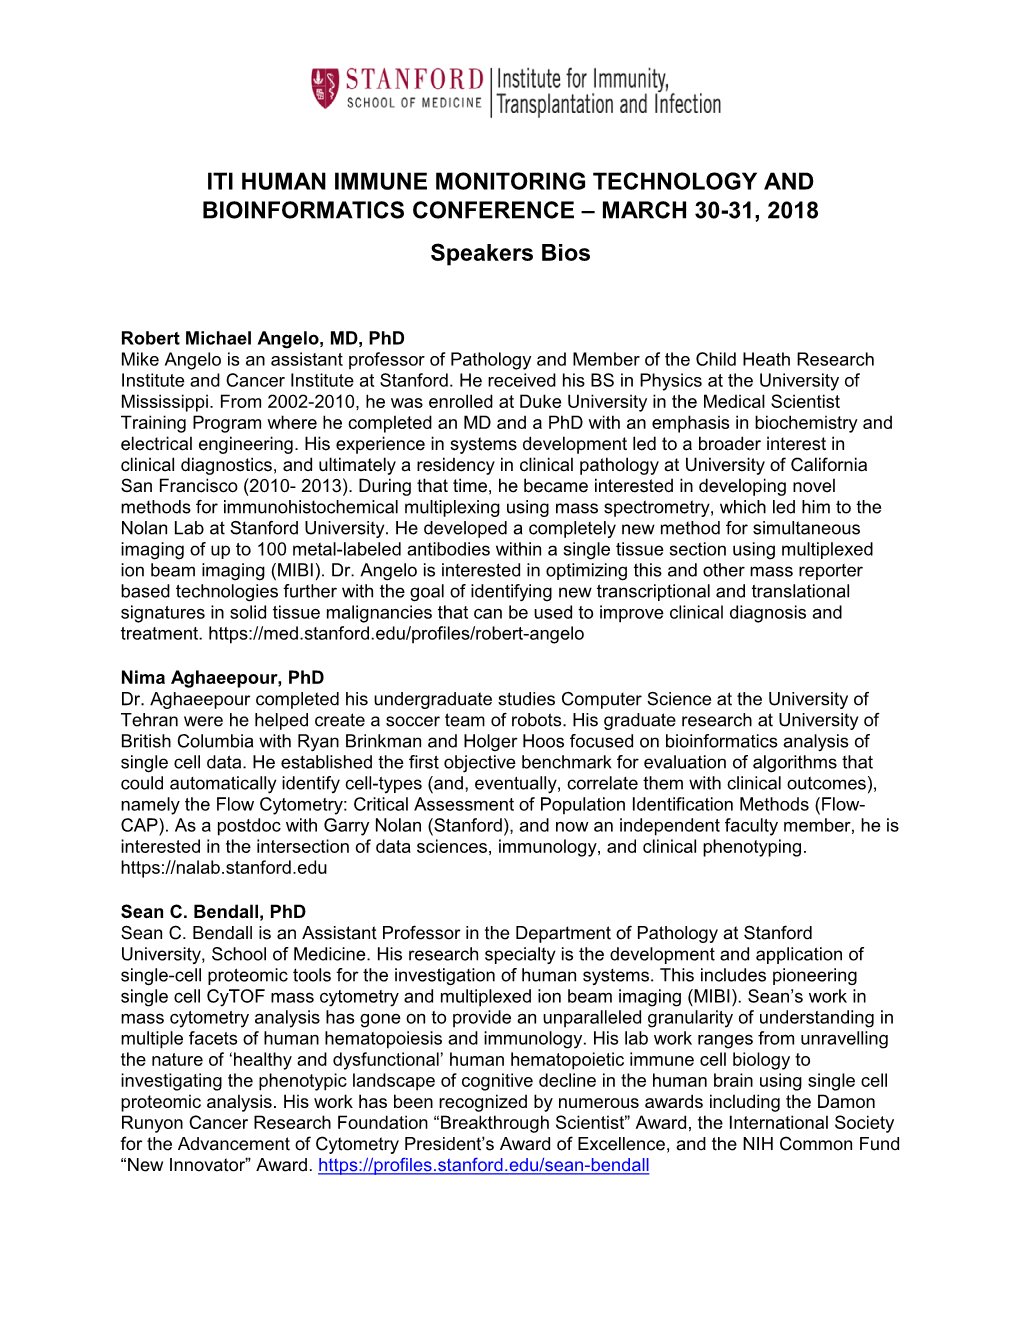 ITI HUMAN IMMUNE MONITORING TECHNOLOGY and BIOINFORMATICS CONFERENCE – MARCH 30-31, 2018 Speakers Bios